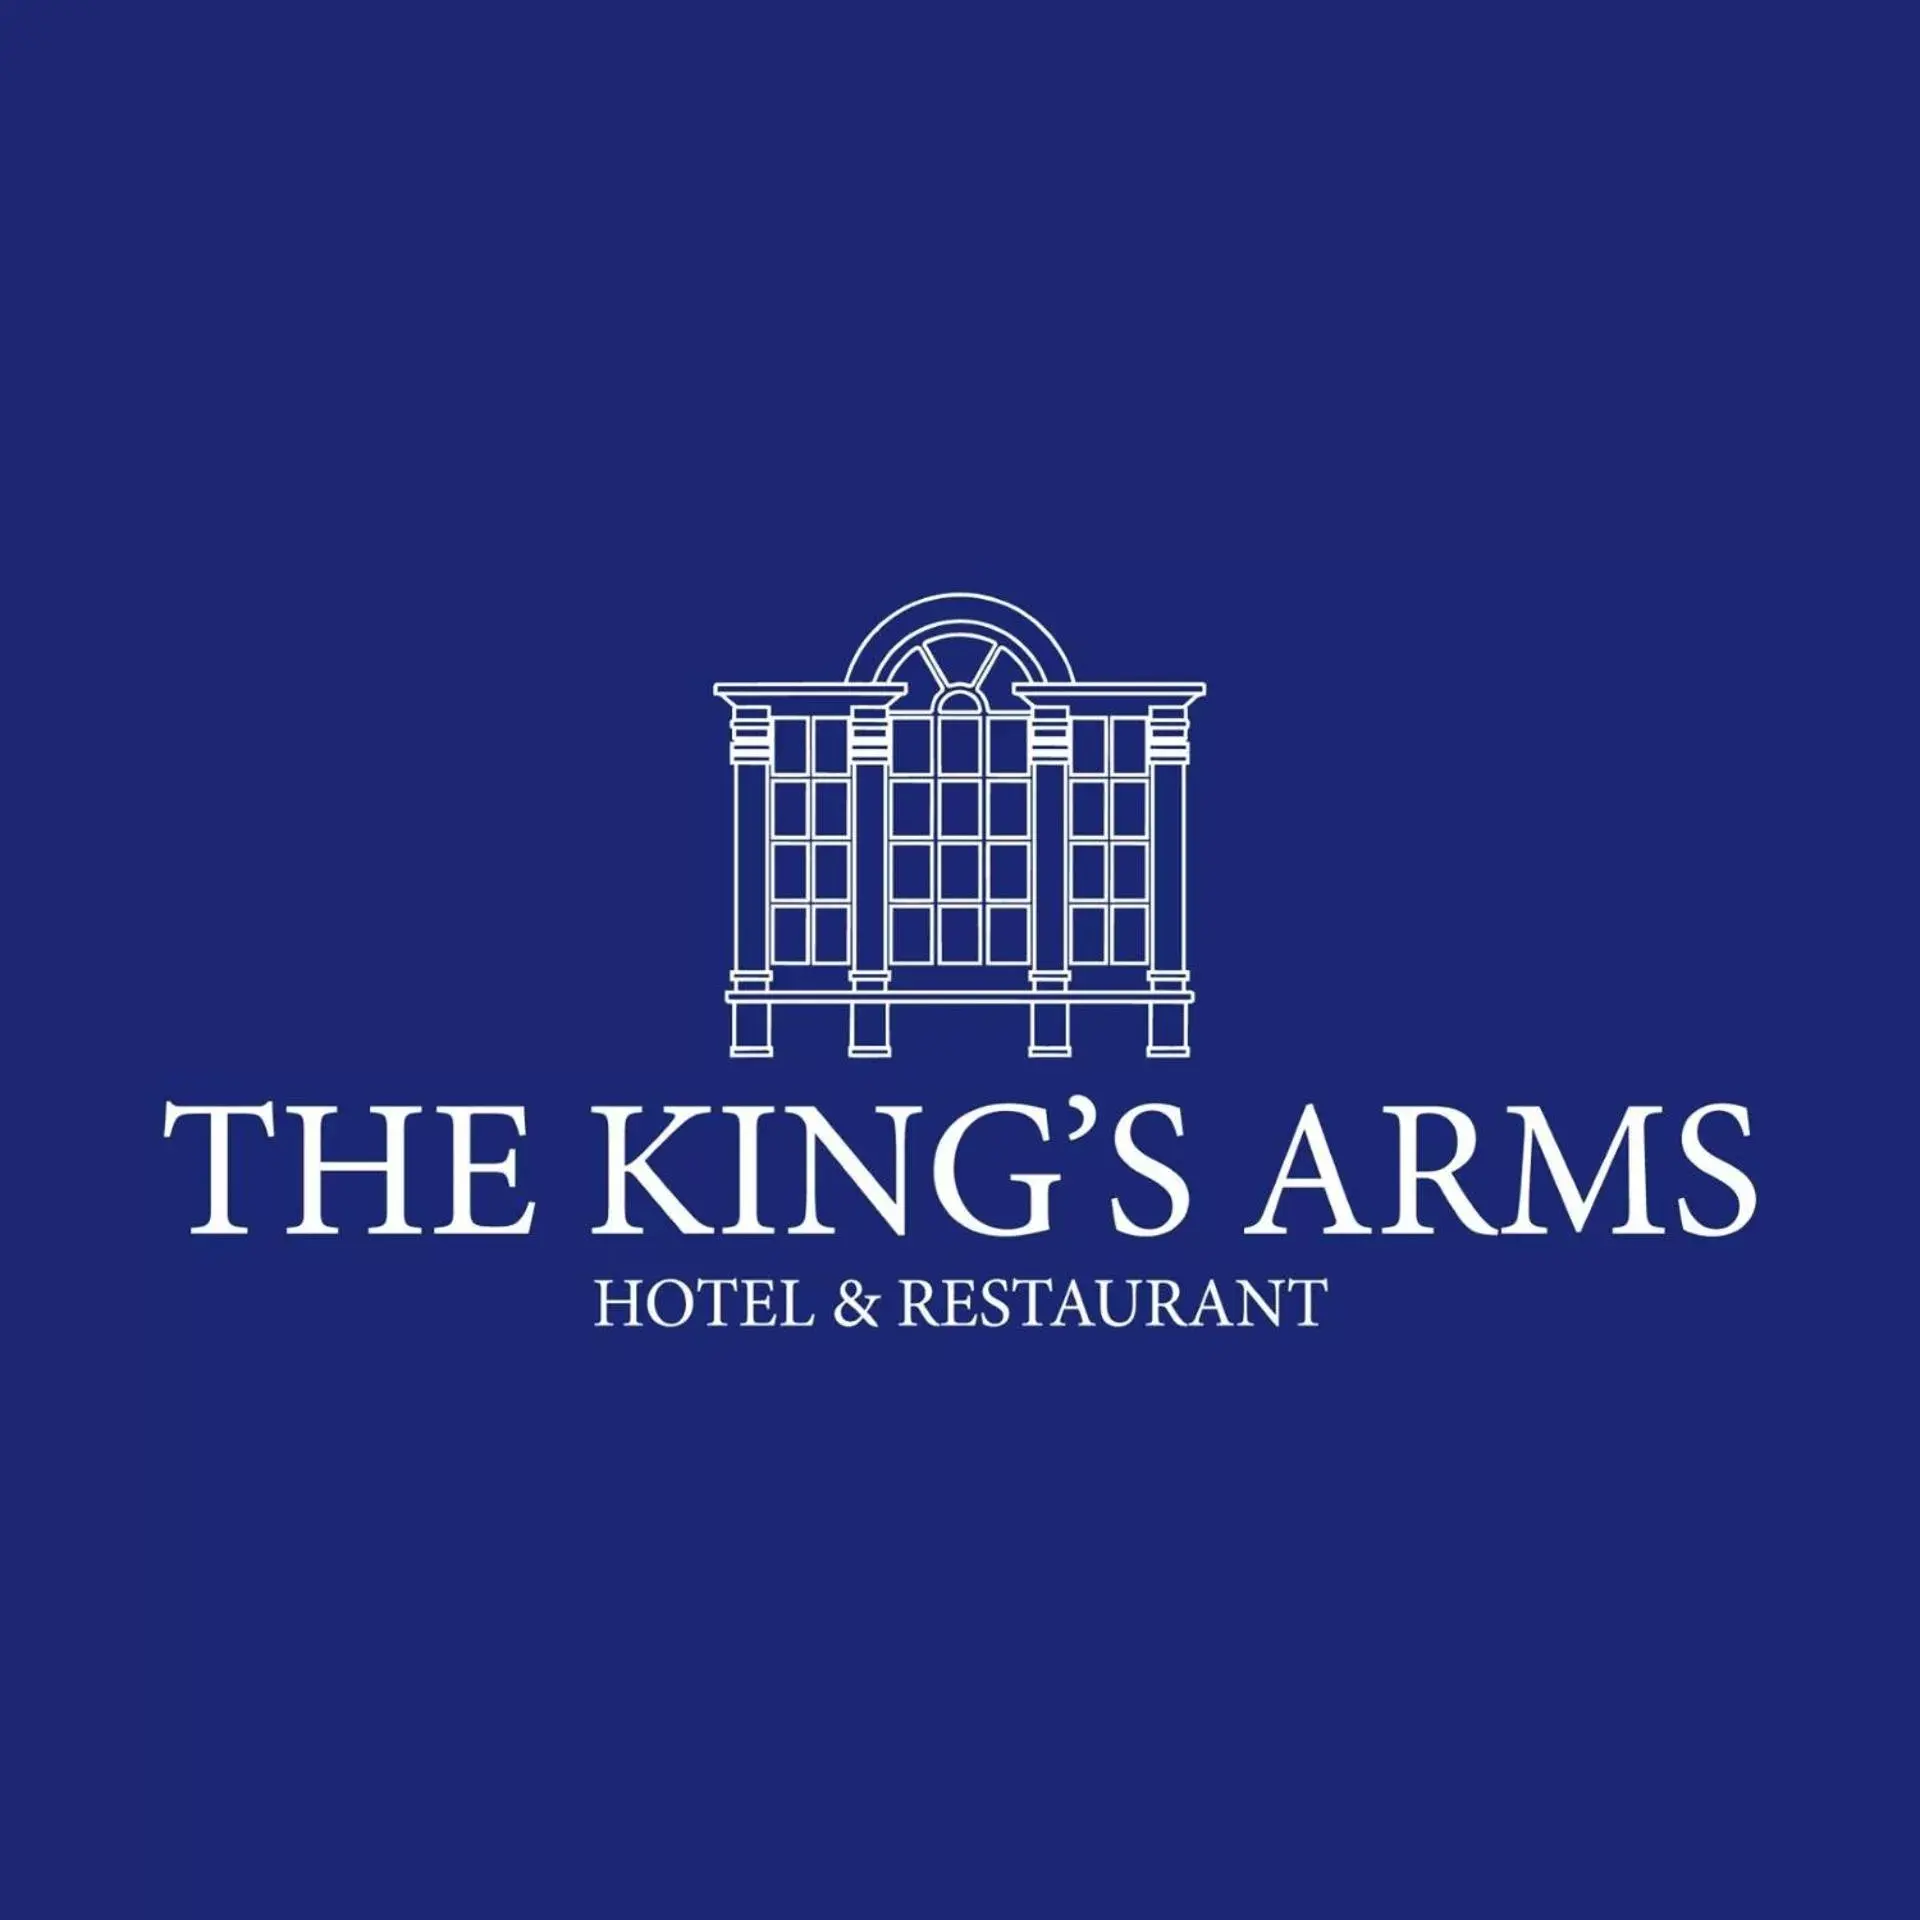 Property logo or sign, Property Logo/Sign in Kings Arms Hotel